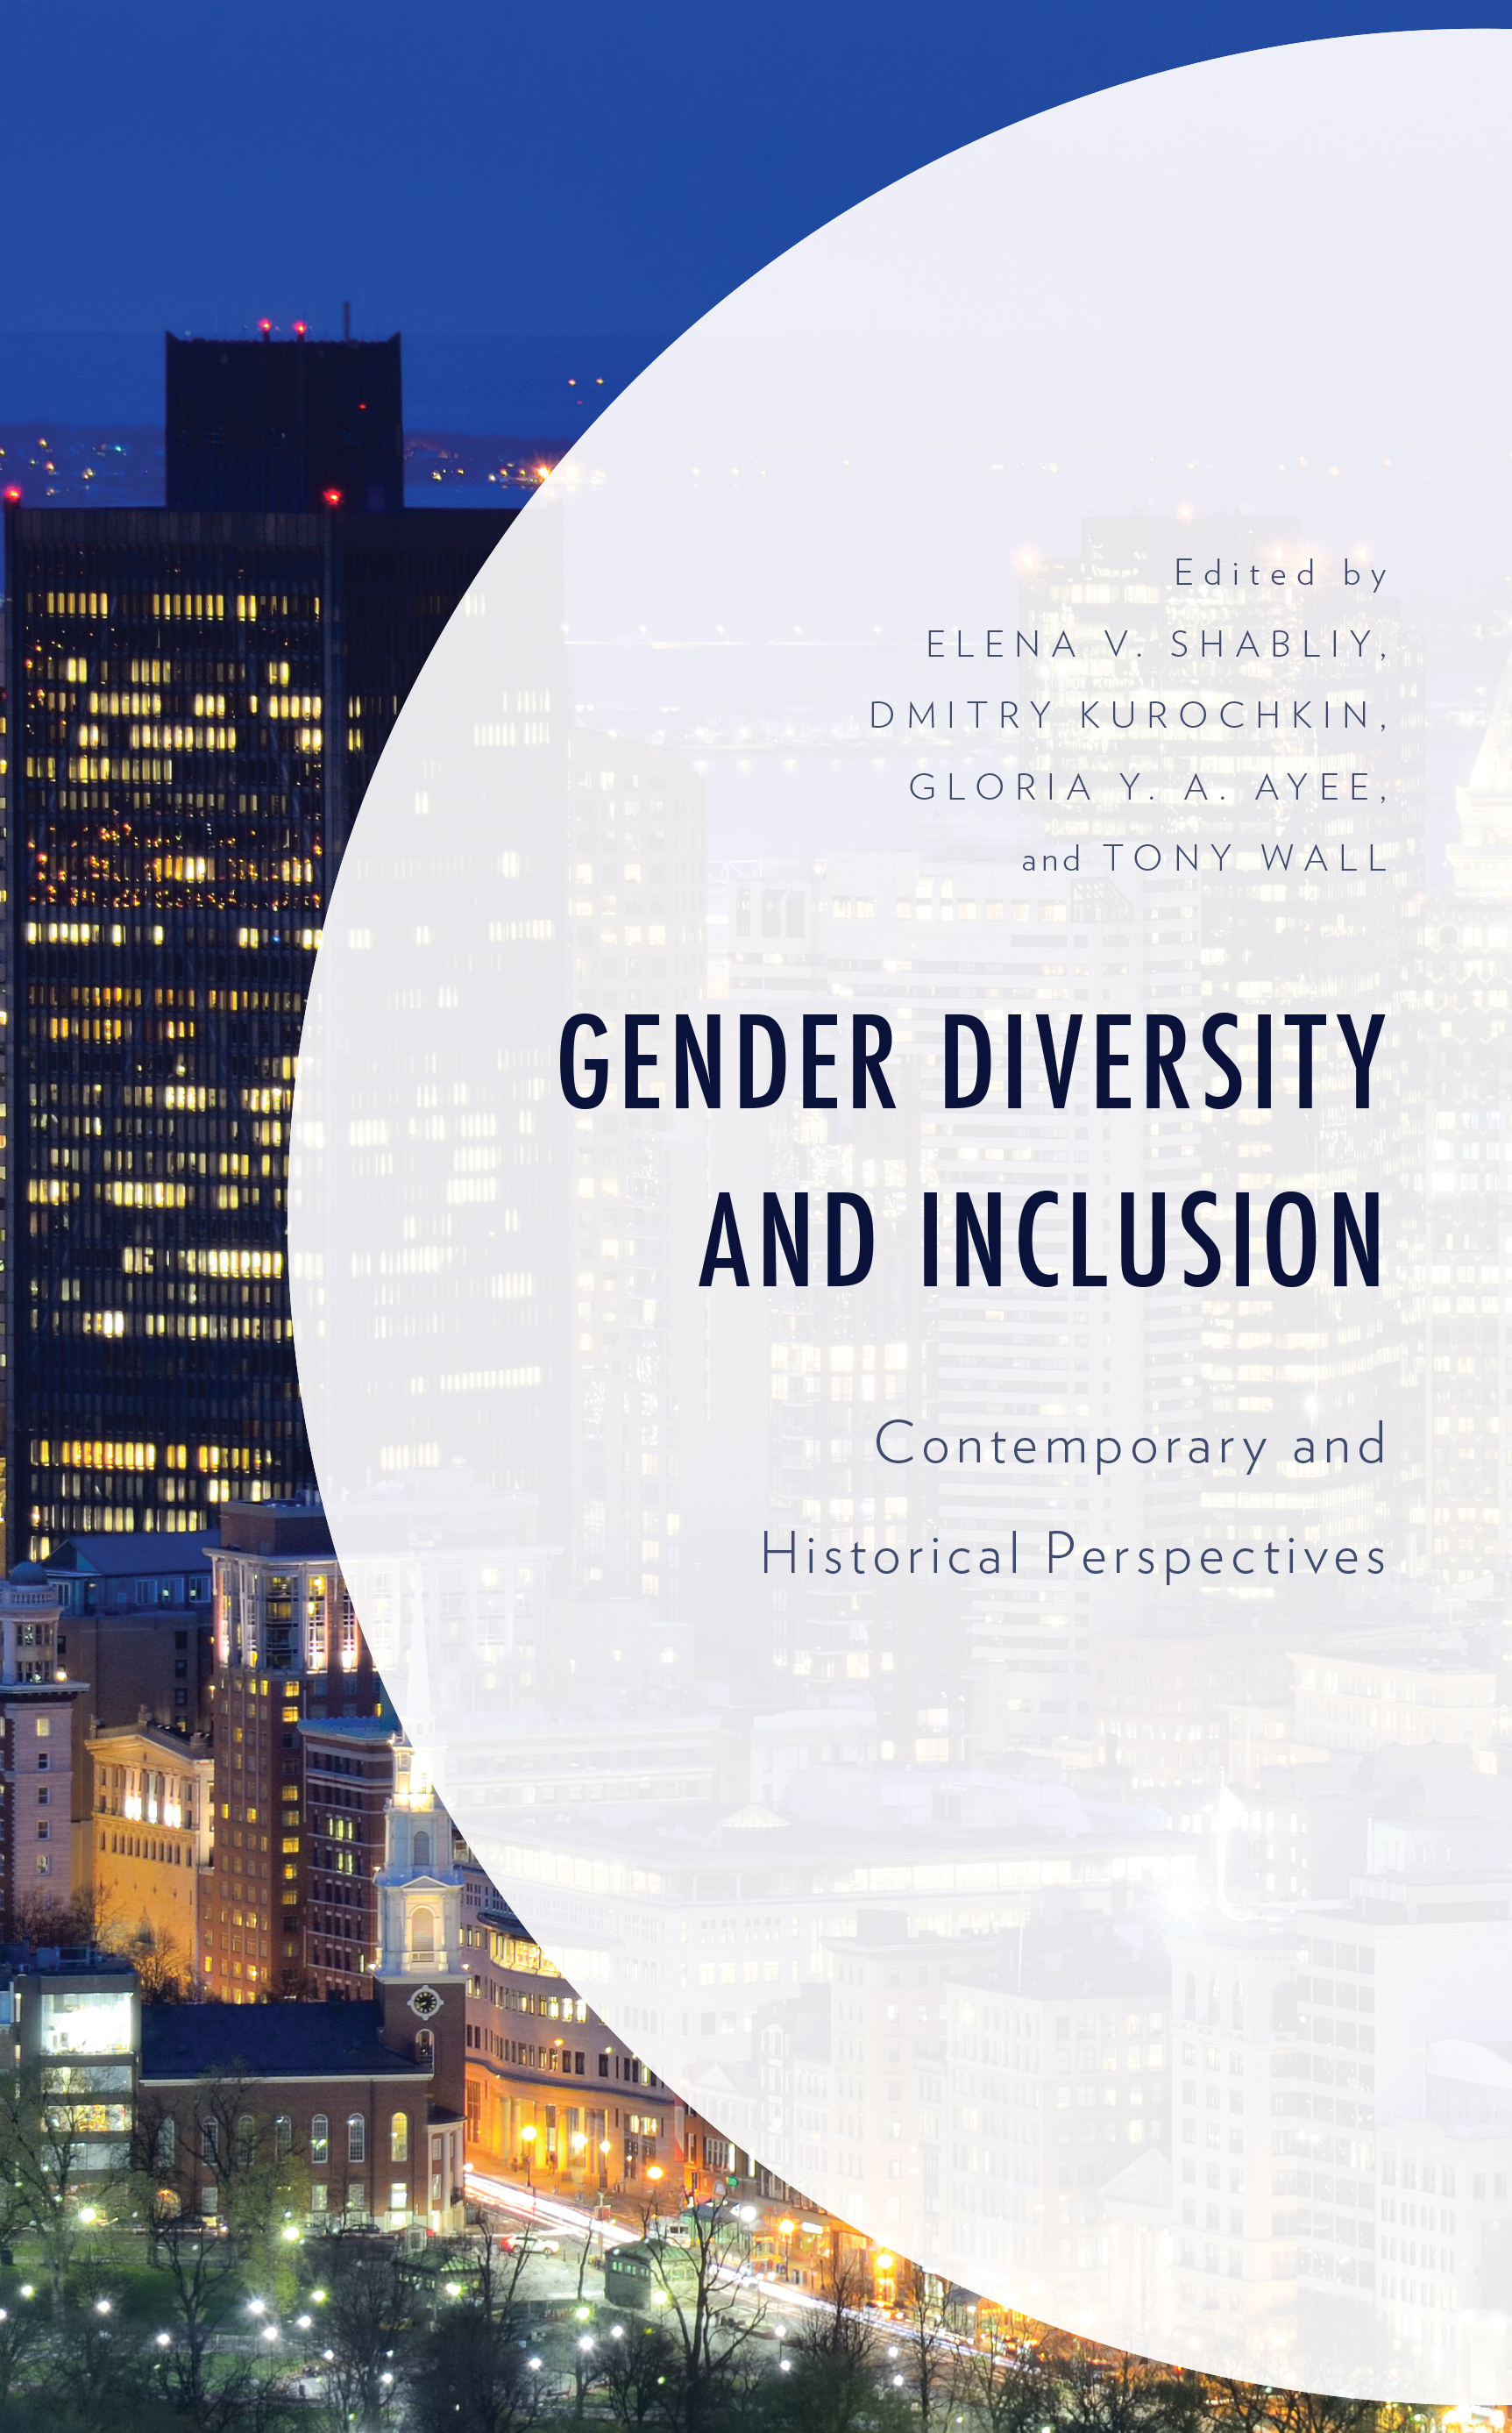 Gender Diversity and Inclusion: Contemporary and Historical Perspectives